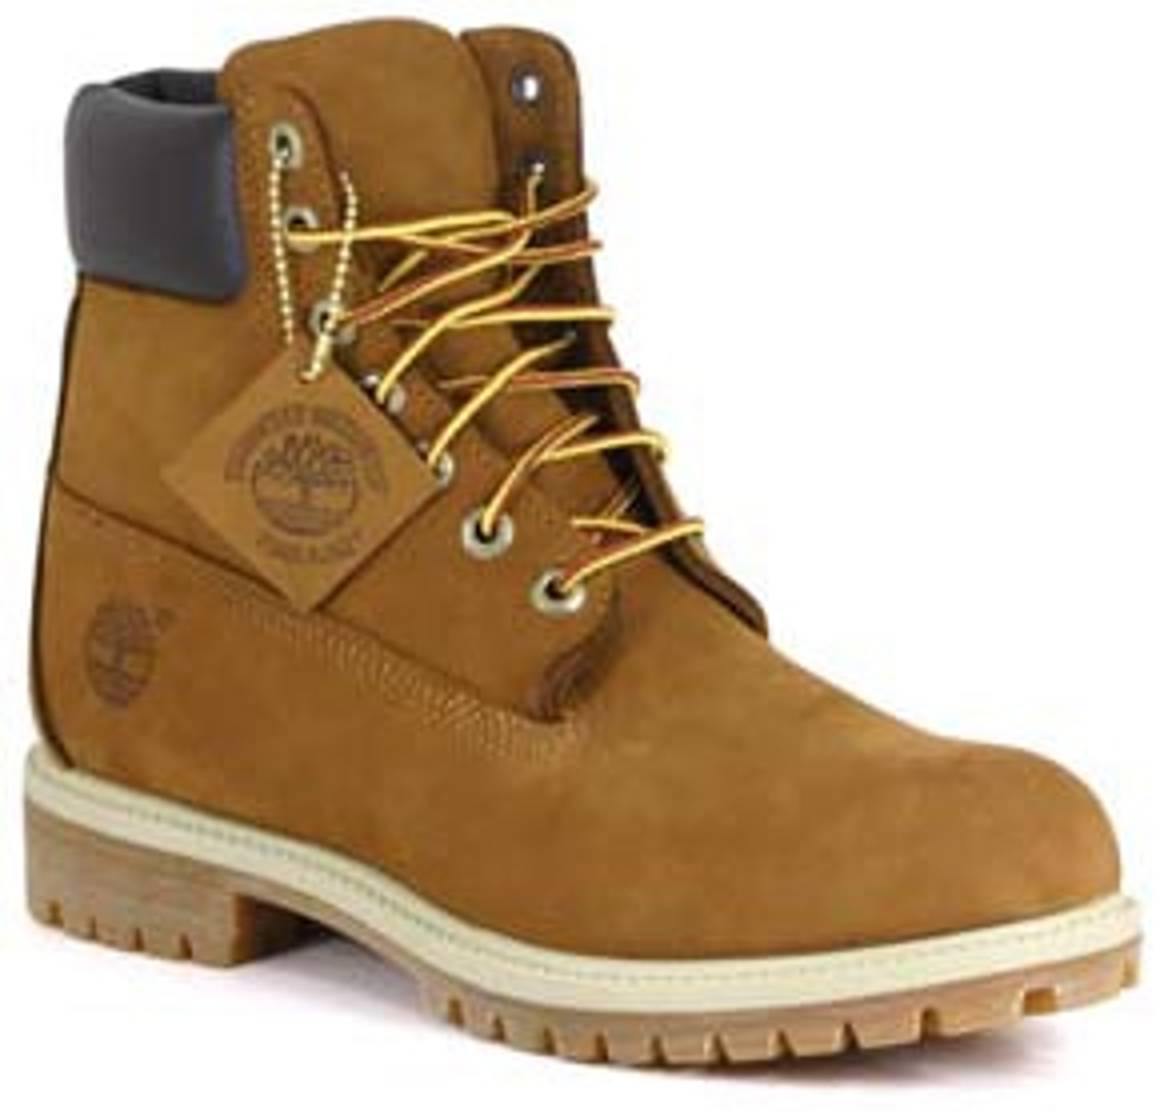 Timberland takeover £1.2bn